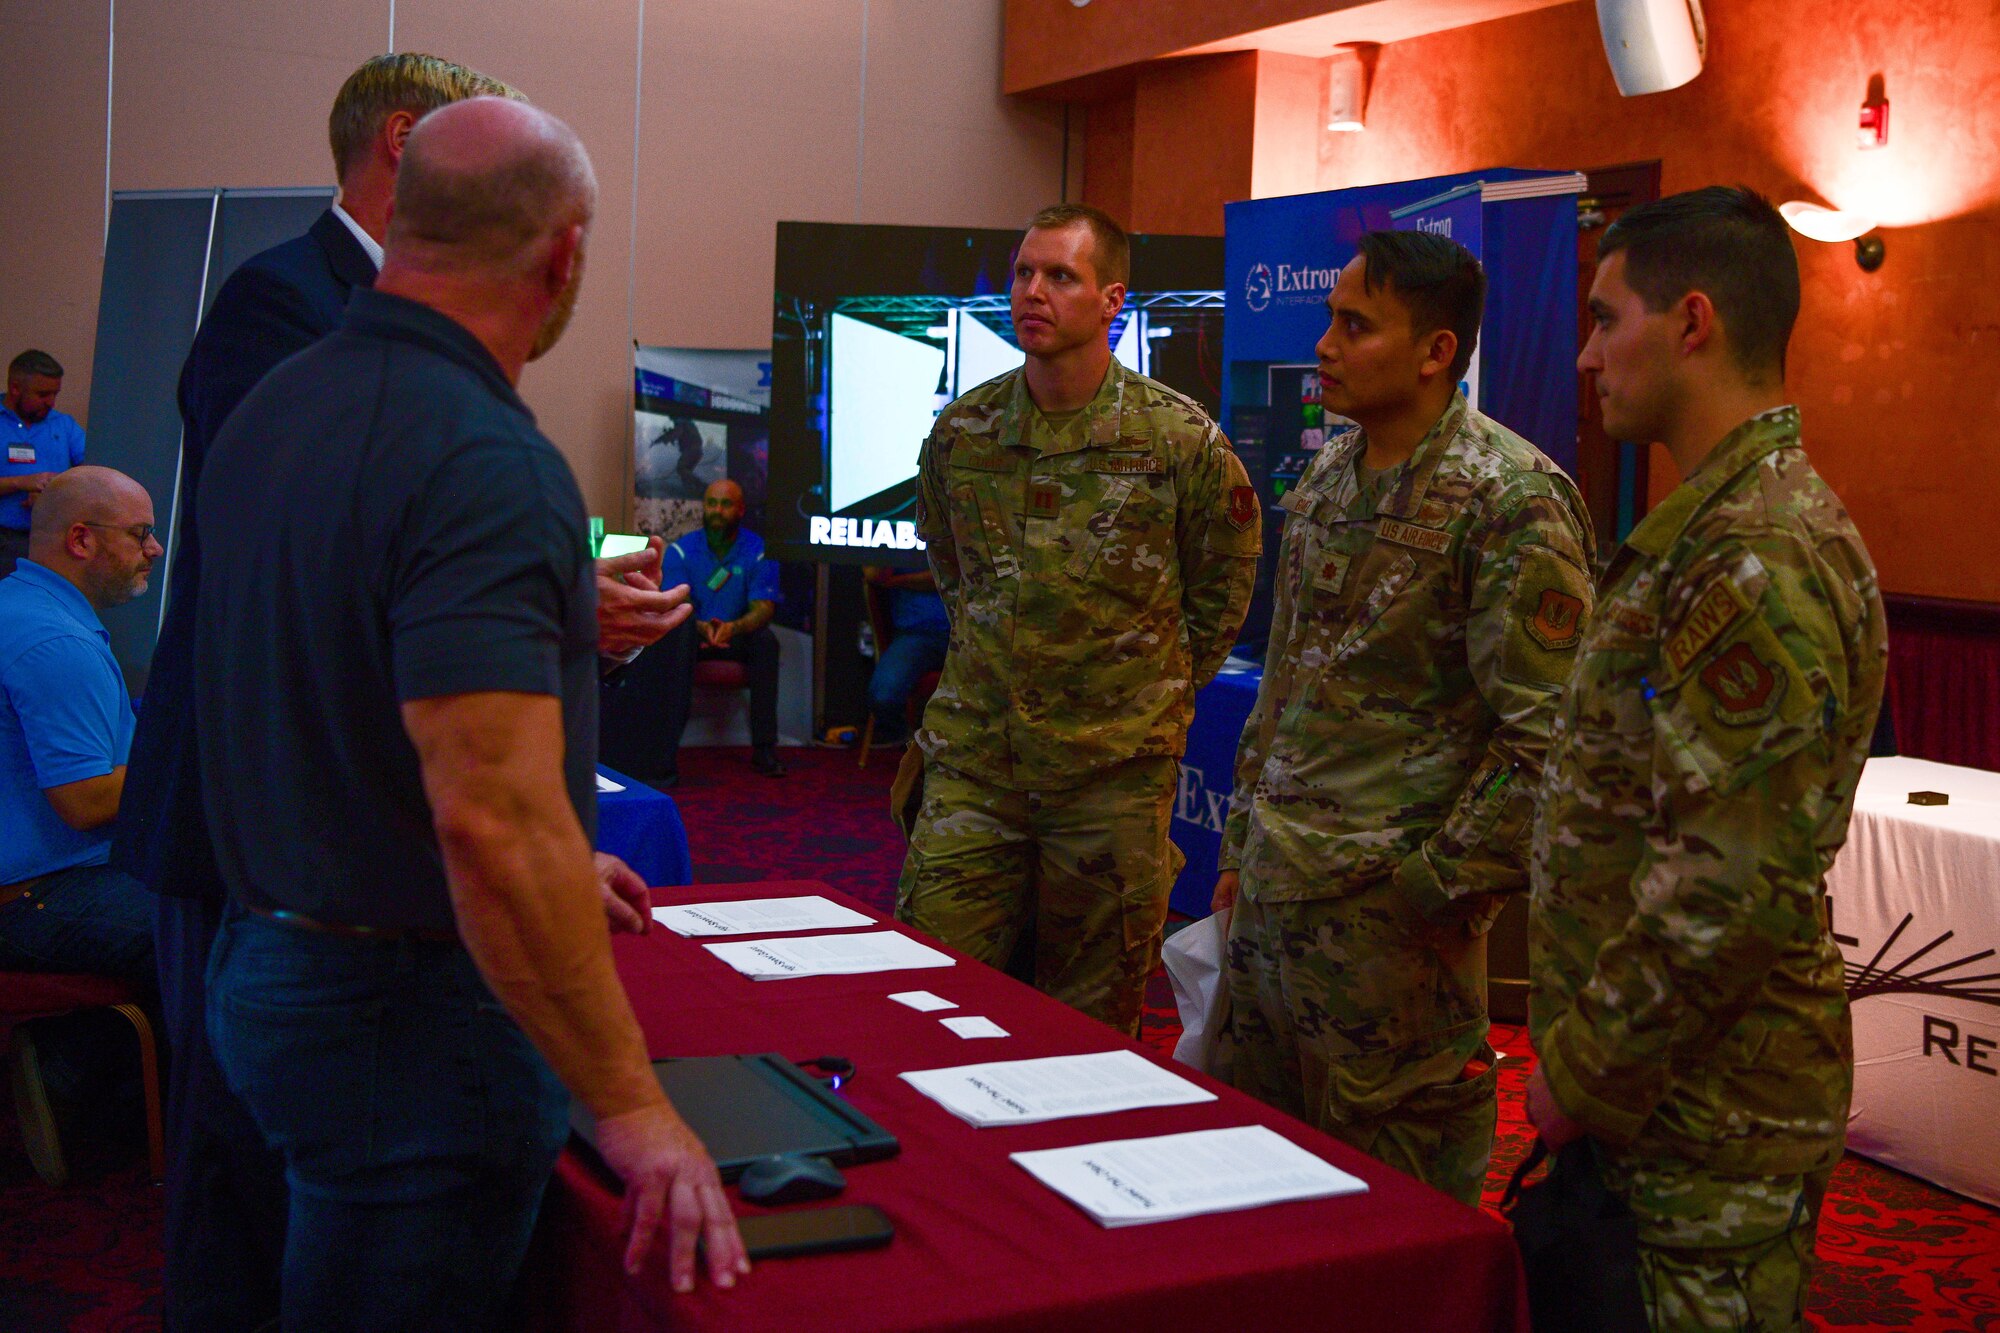 U.S. Airmen review products at a Tech Expo hosted by the 31st Communications Squadron at Aviano Air Base, Italy, Oct. 25, 2022. The Tech Expo brought government and industry together to collaborate on mission requirements and technology solutions. (U.S. Air Force photo by Senior Airman Brooke Moeder)